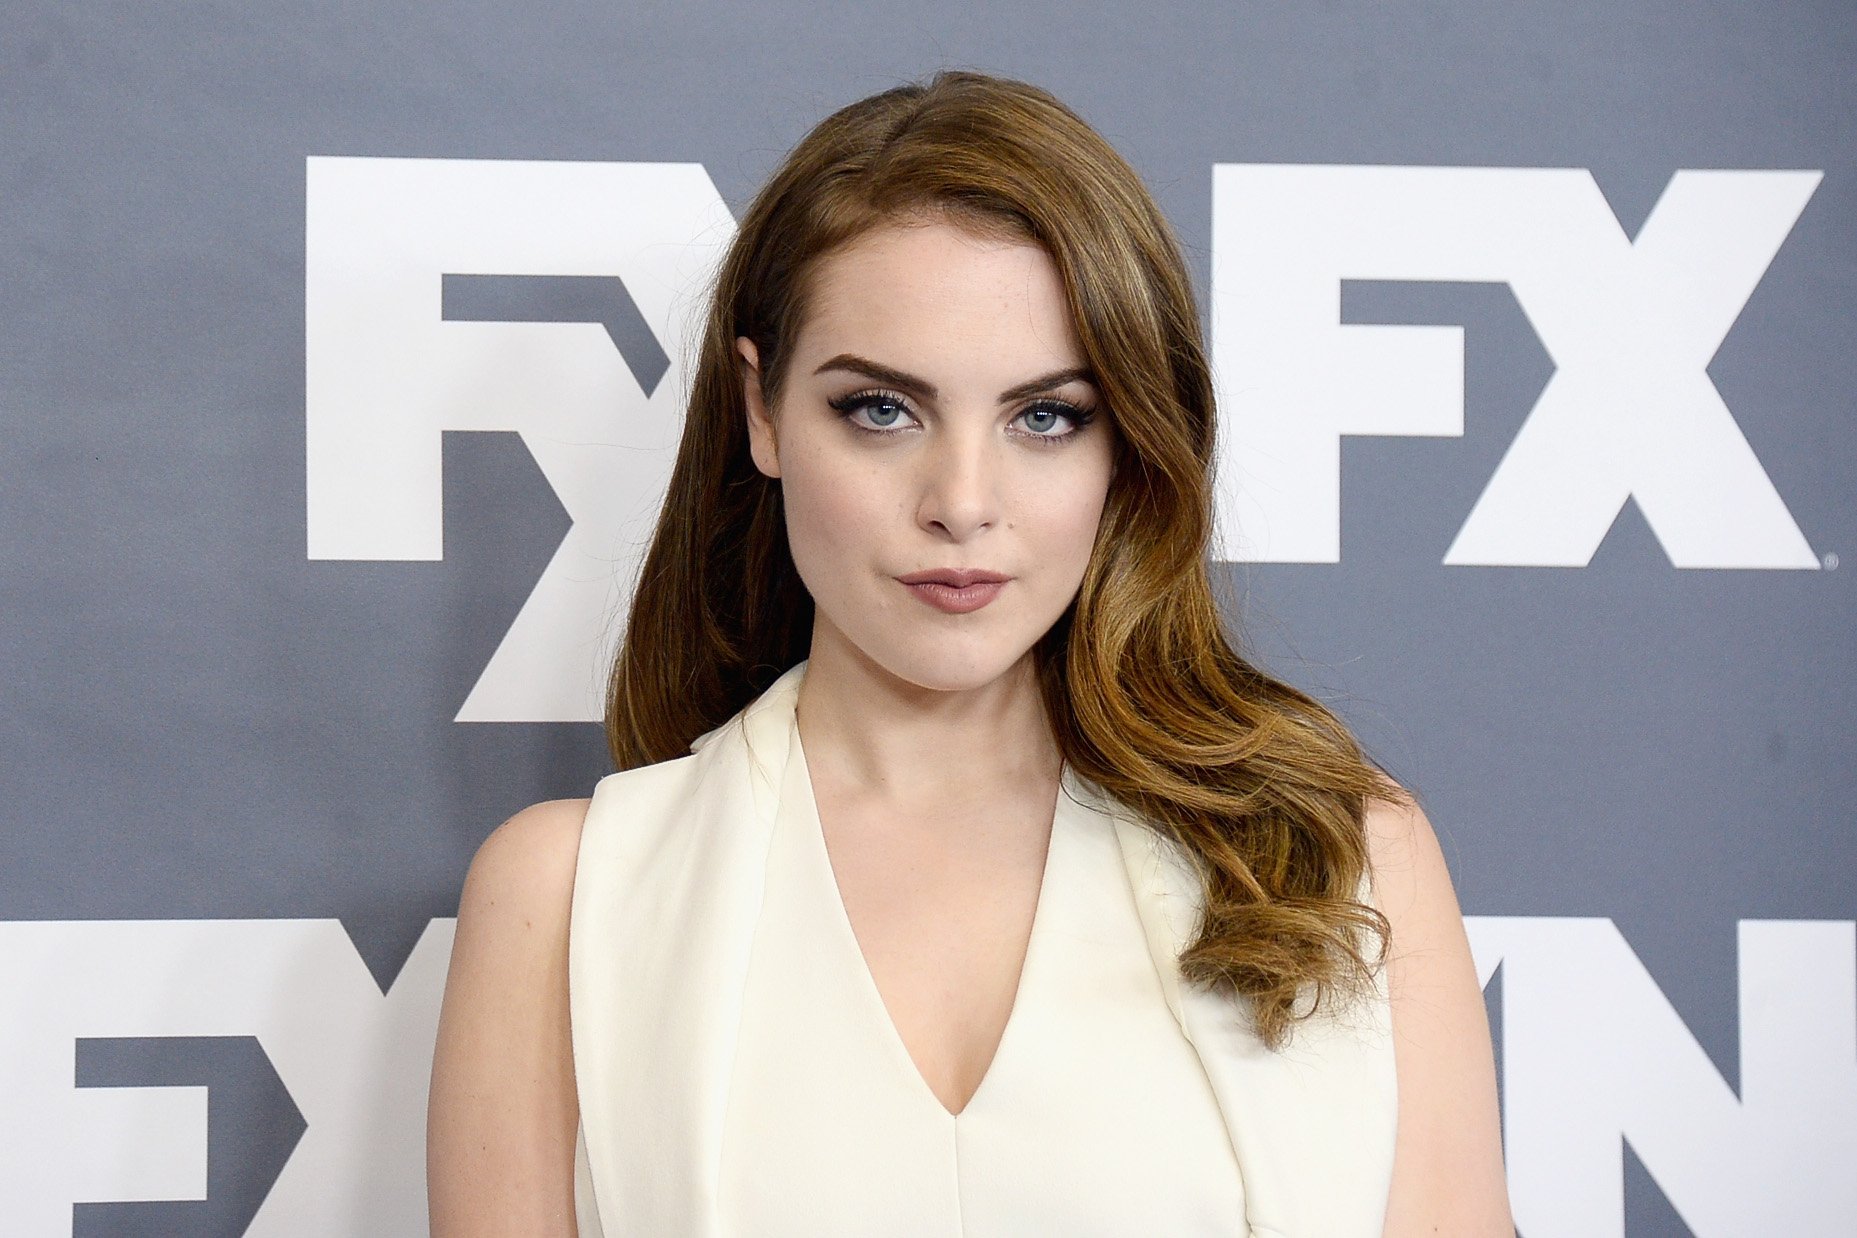 Elizabeth Gillies attends the FX Networks TCA 2016 Summer Press Tour on August 9, 2016 in Beverly Hills, California.